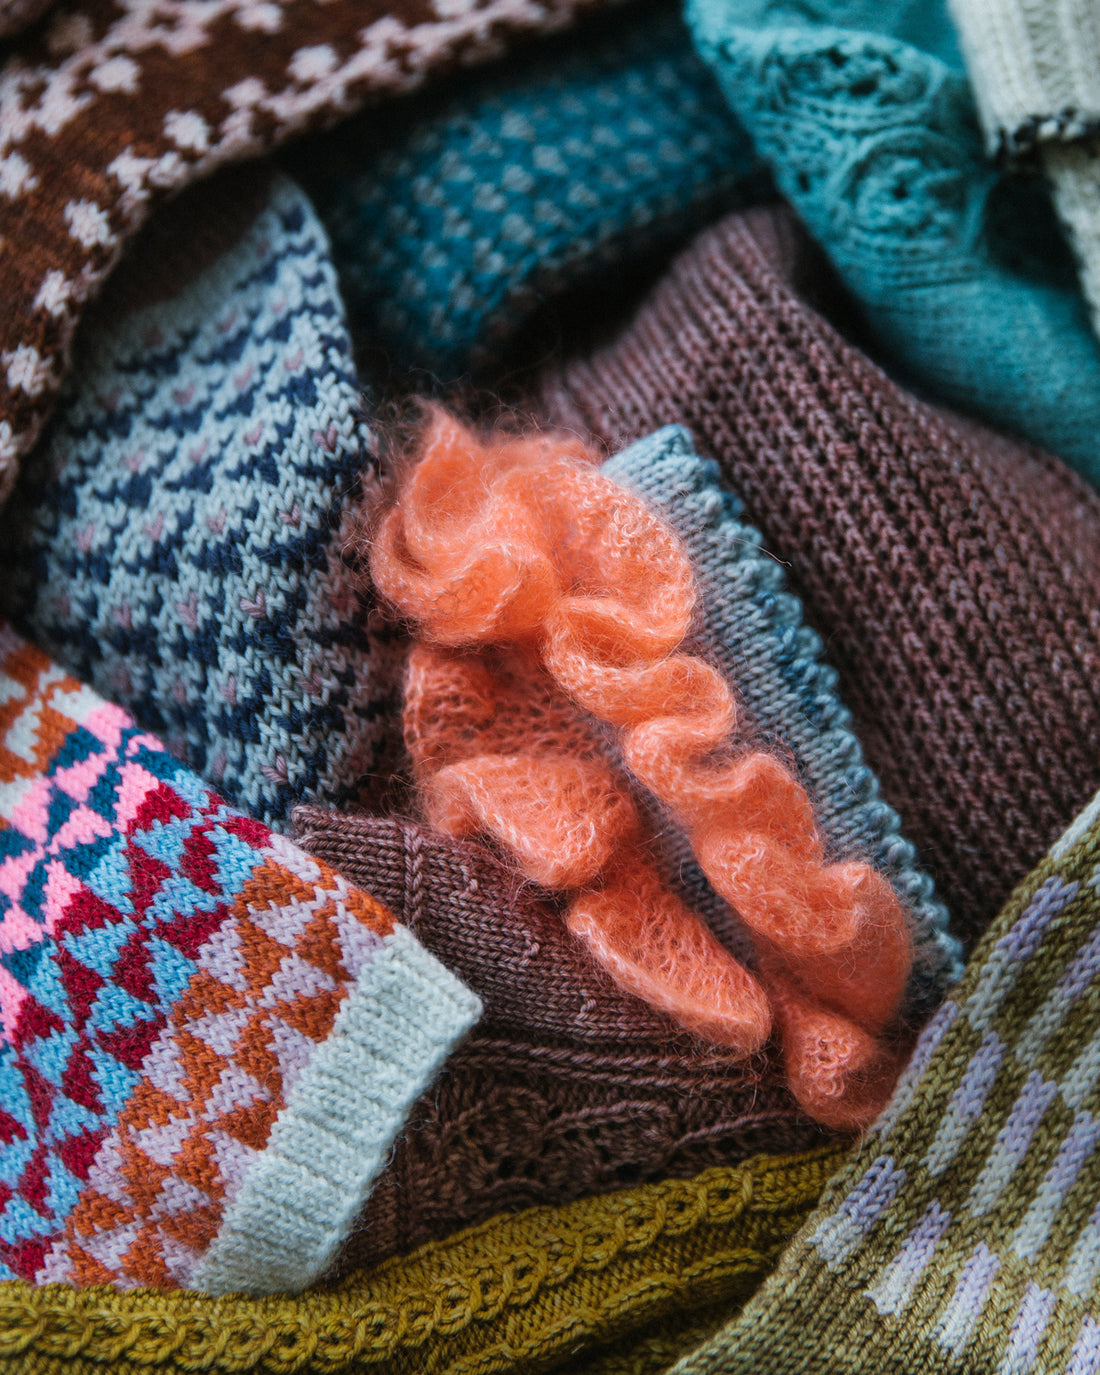 Join our fun-filled sock challenge and knit-along